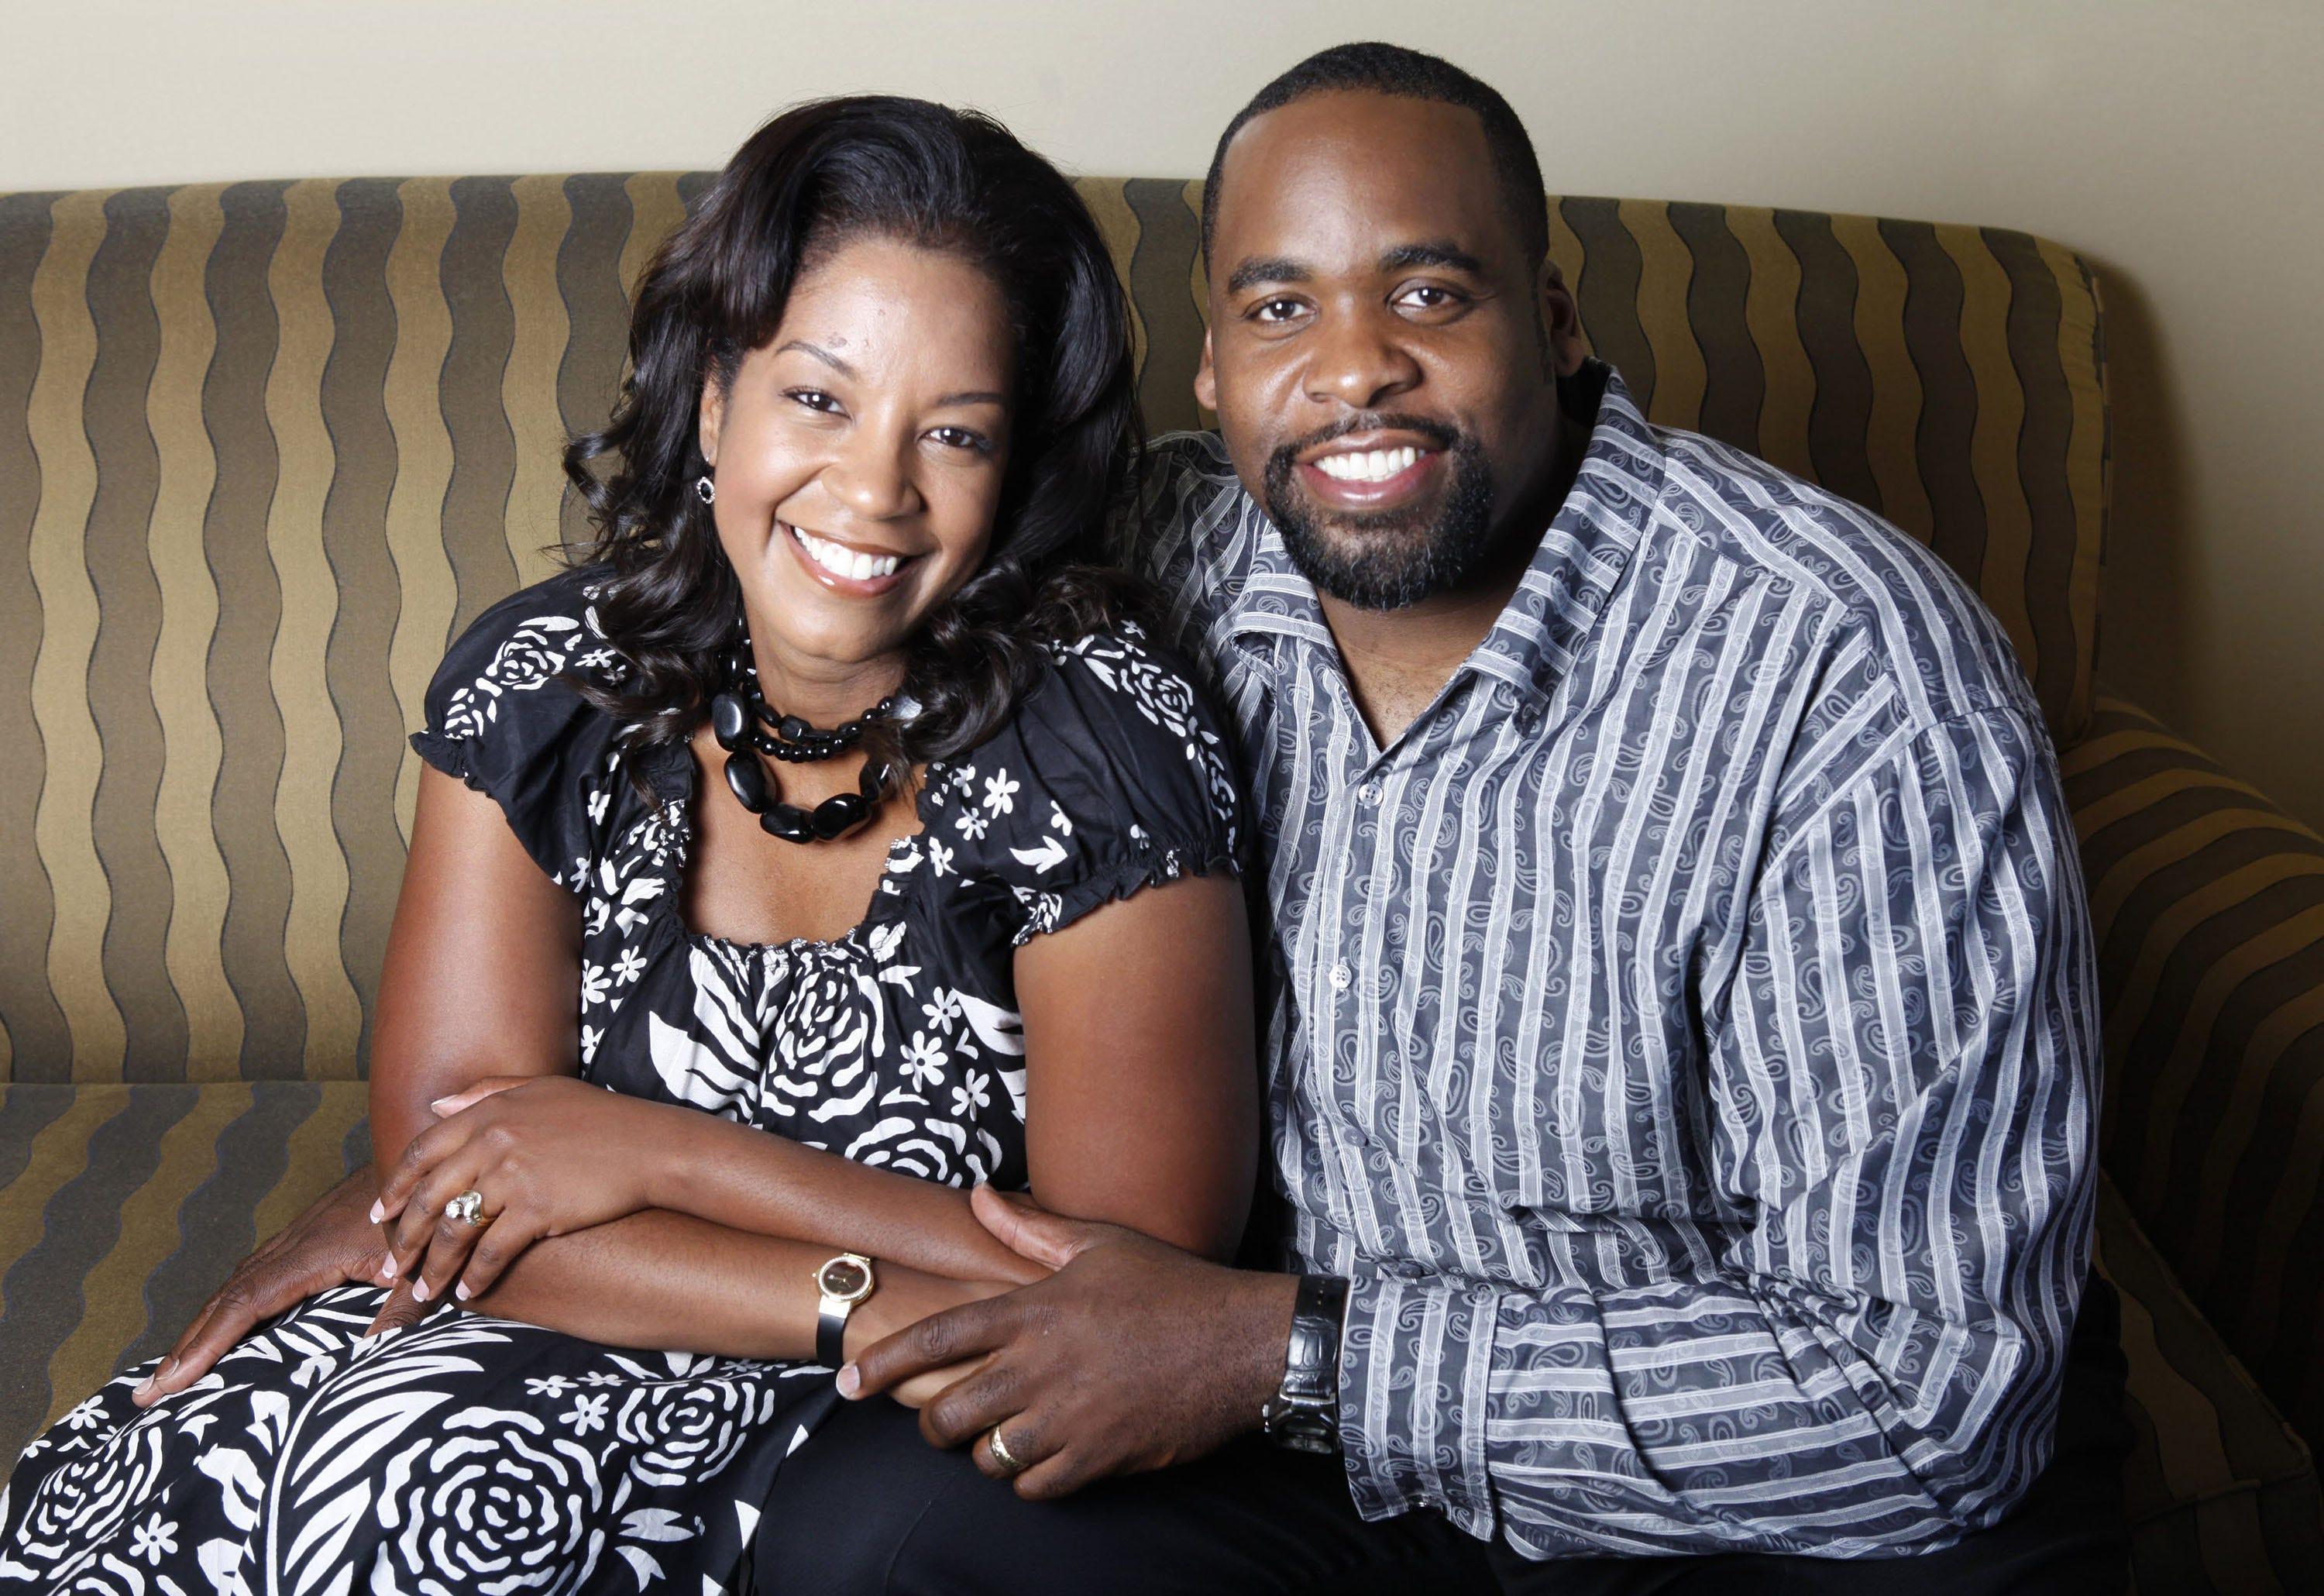 Kwame Kilpatrick, former Mayor of Detroit, and his wife, Carlita Kilpatrick, left, pose for portrait at a Southlake, Texas hotel, May 5, 2010.